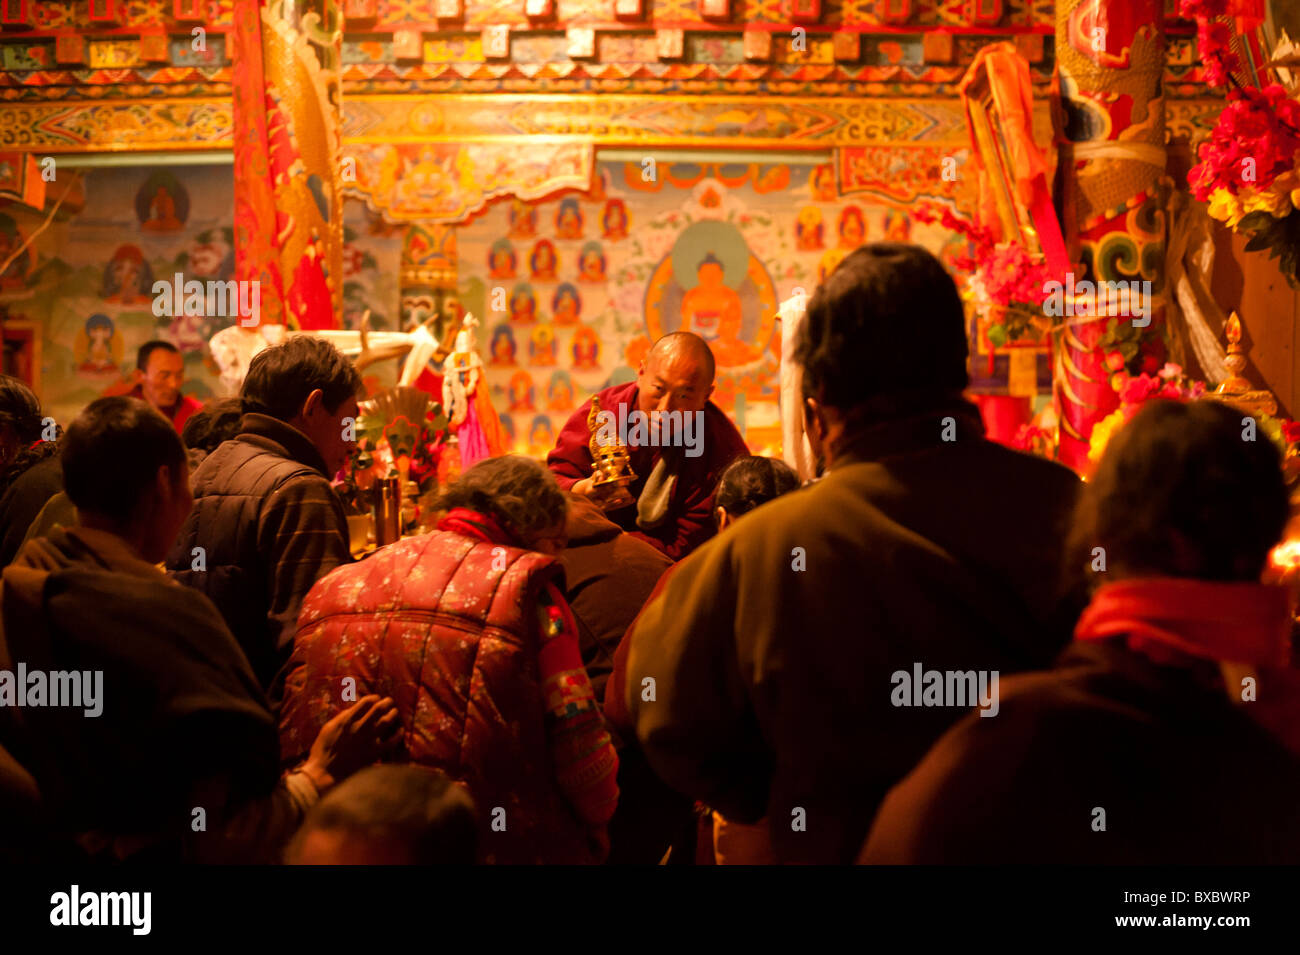 A Tibetan monk blesses lamaist adherents during a ceremony in Tagong Temple, Sichuan province, China. Stock Photo